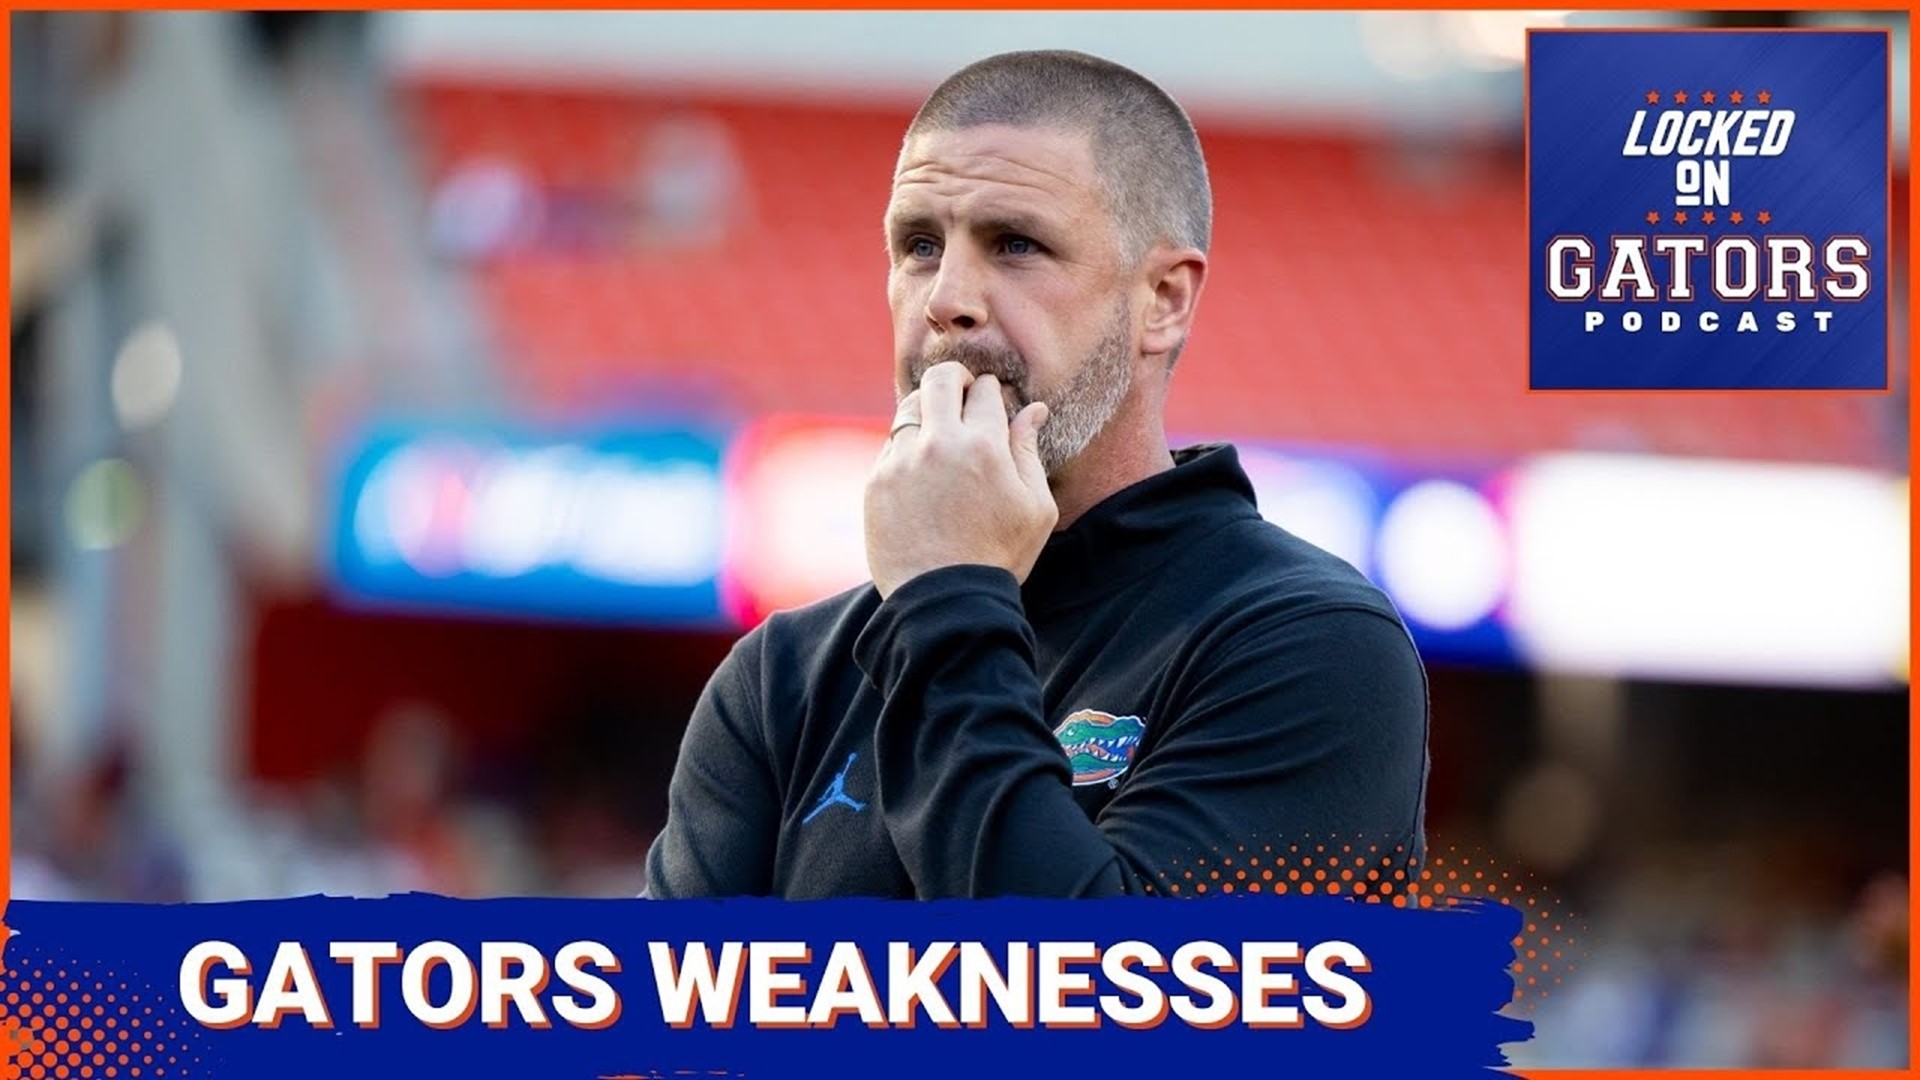 The Florida Gators football team under head coach Billy Napier has been improving since he was hired as Dan Mullen's replacement